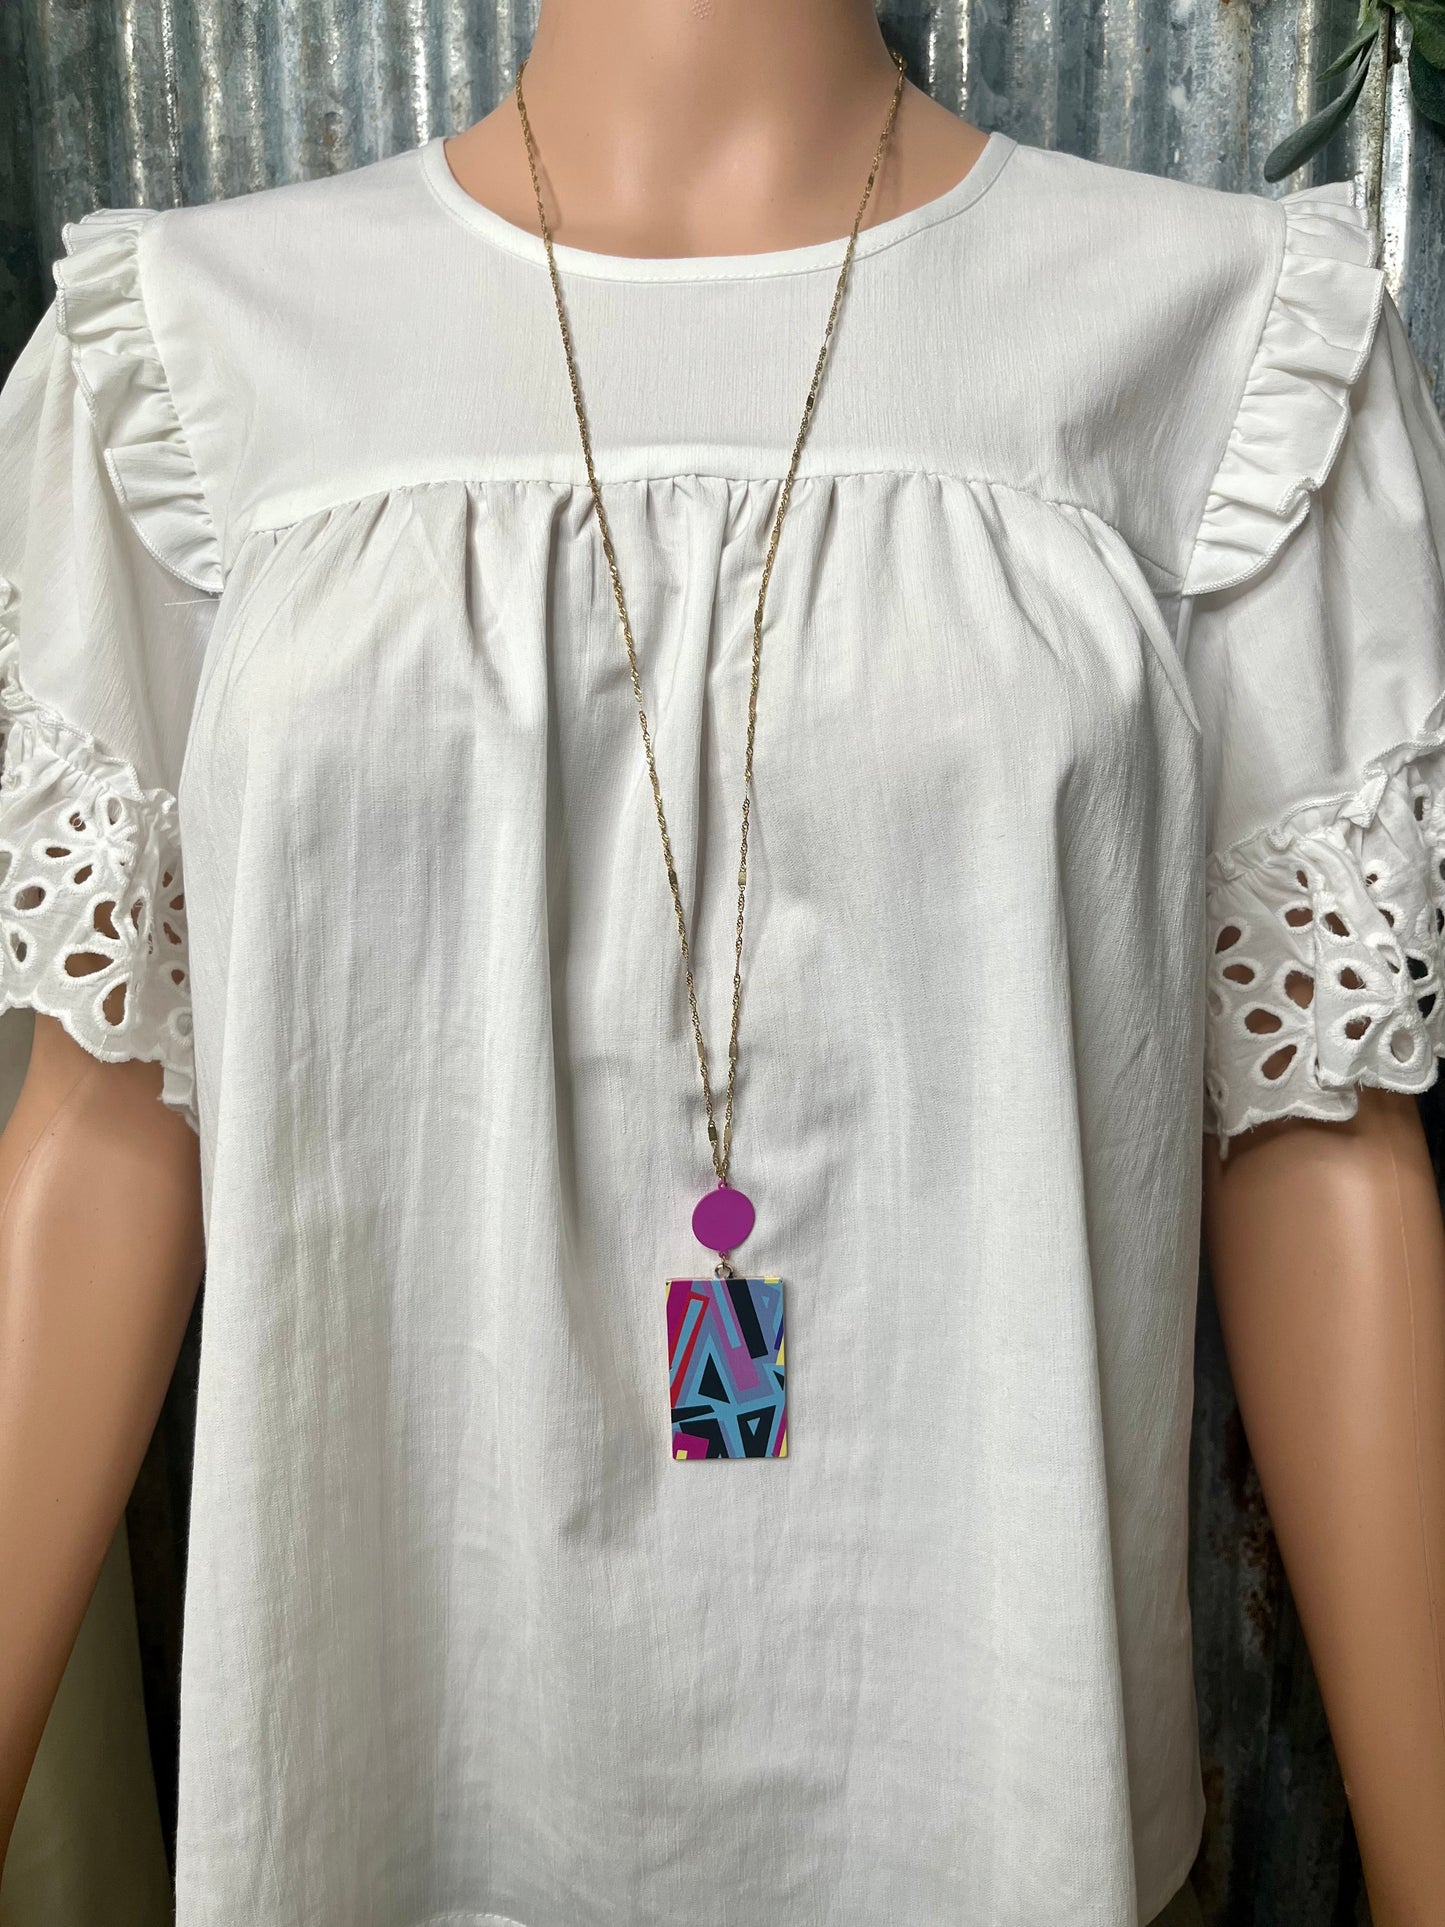 Colorful Asymmetrical Necklace with Pink Pendant